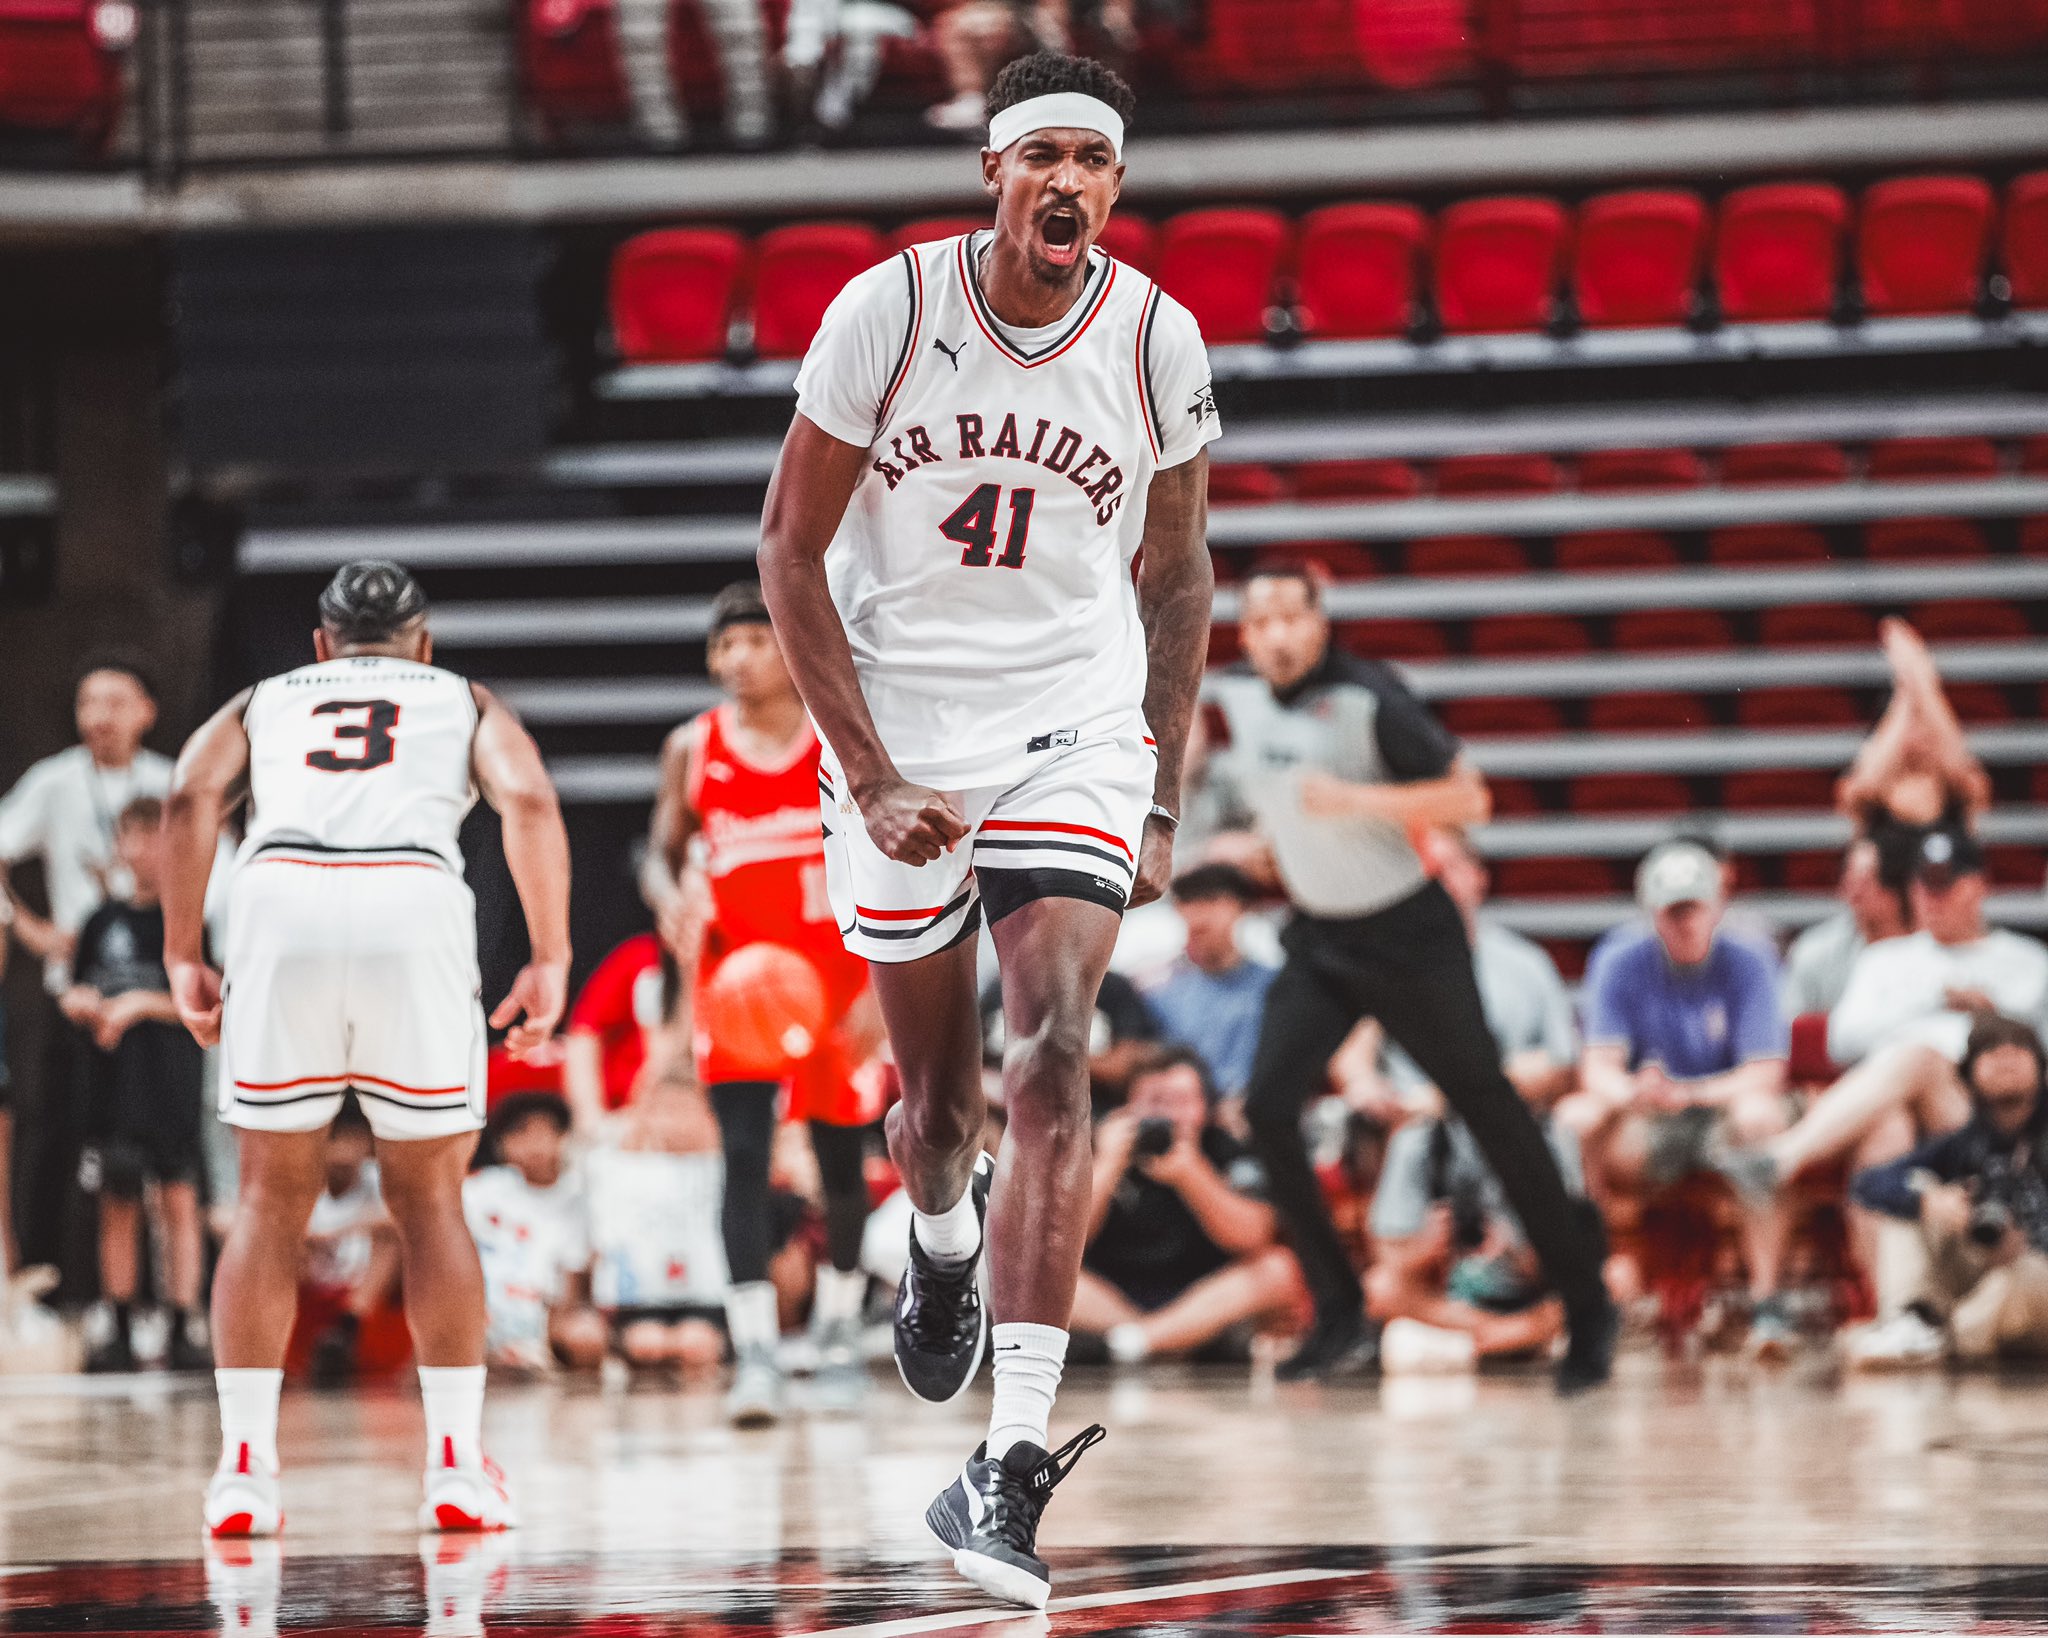 Texas Tech's basketball run might be the end of one trend in